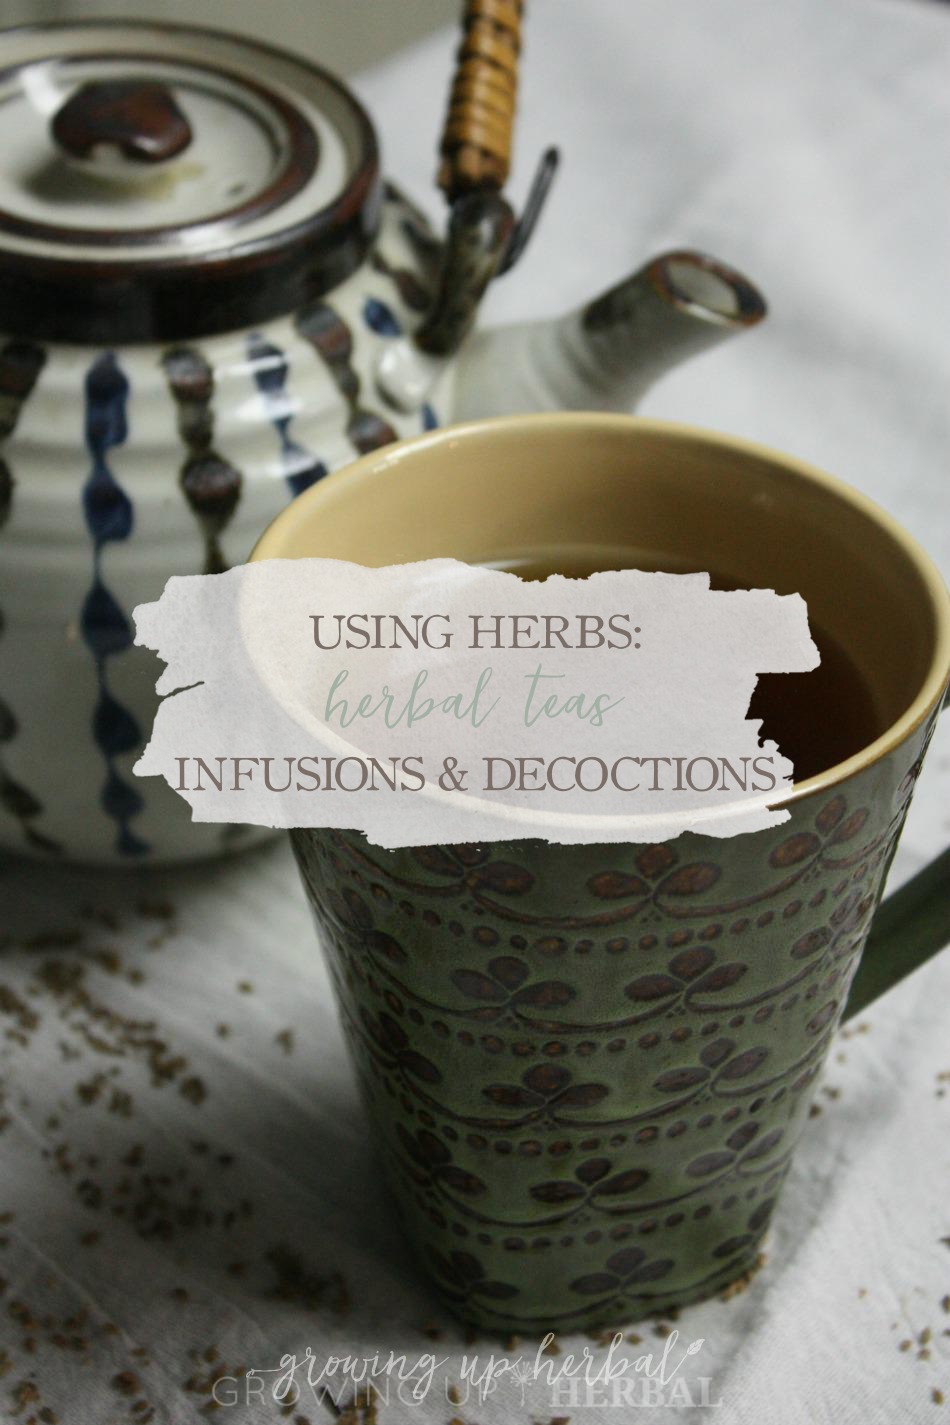 Using Herbs: Herbal Teas, Infusions, and Decoctions | Growing Up Herbal | Learn difference in herbal teas, infusions, and decoctions as well as how to make each one.